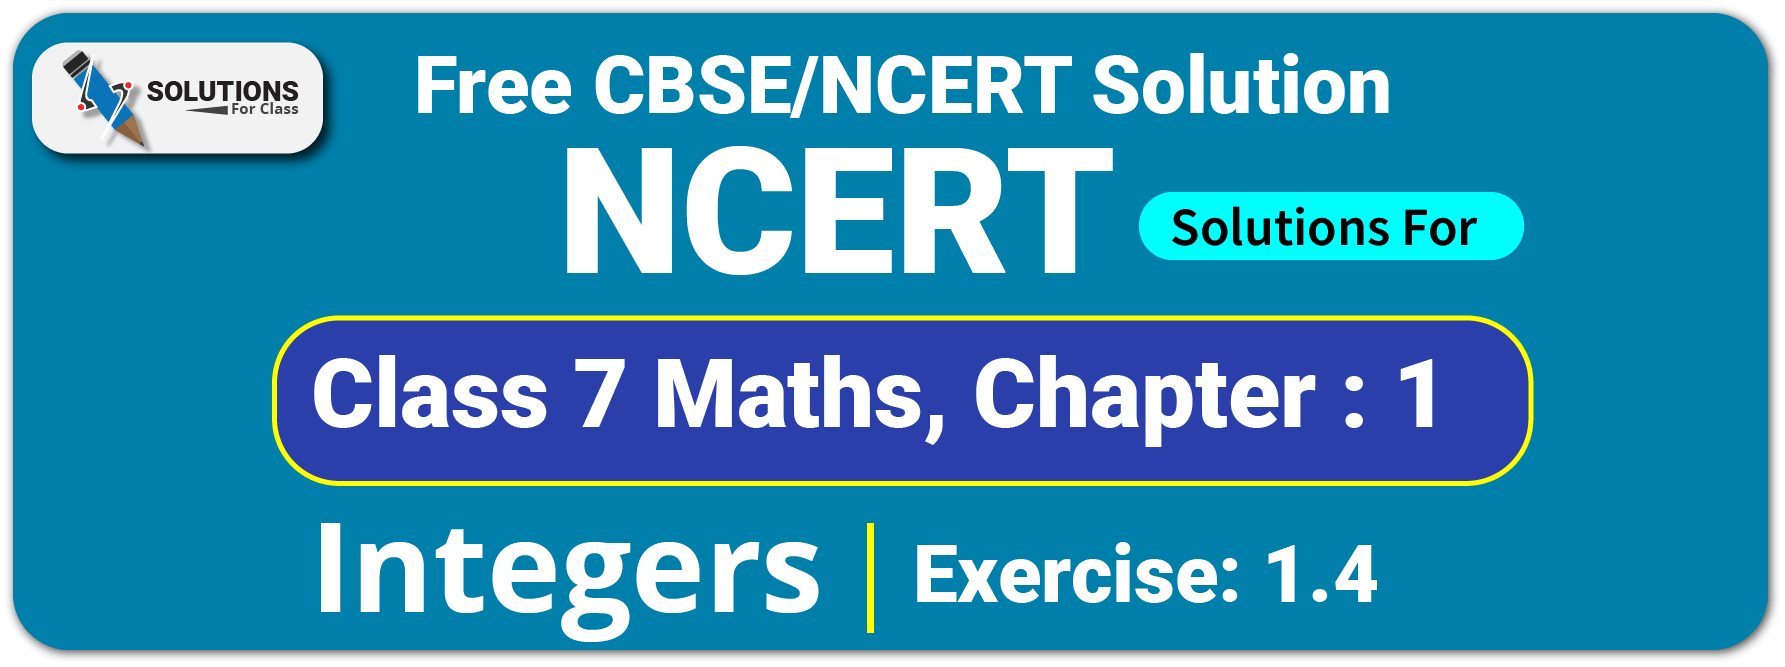 NCERT Solutions For Class 7 Chapter 1, Integers , Exercise 1.4